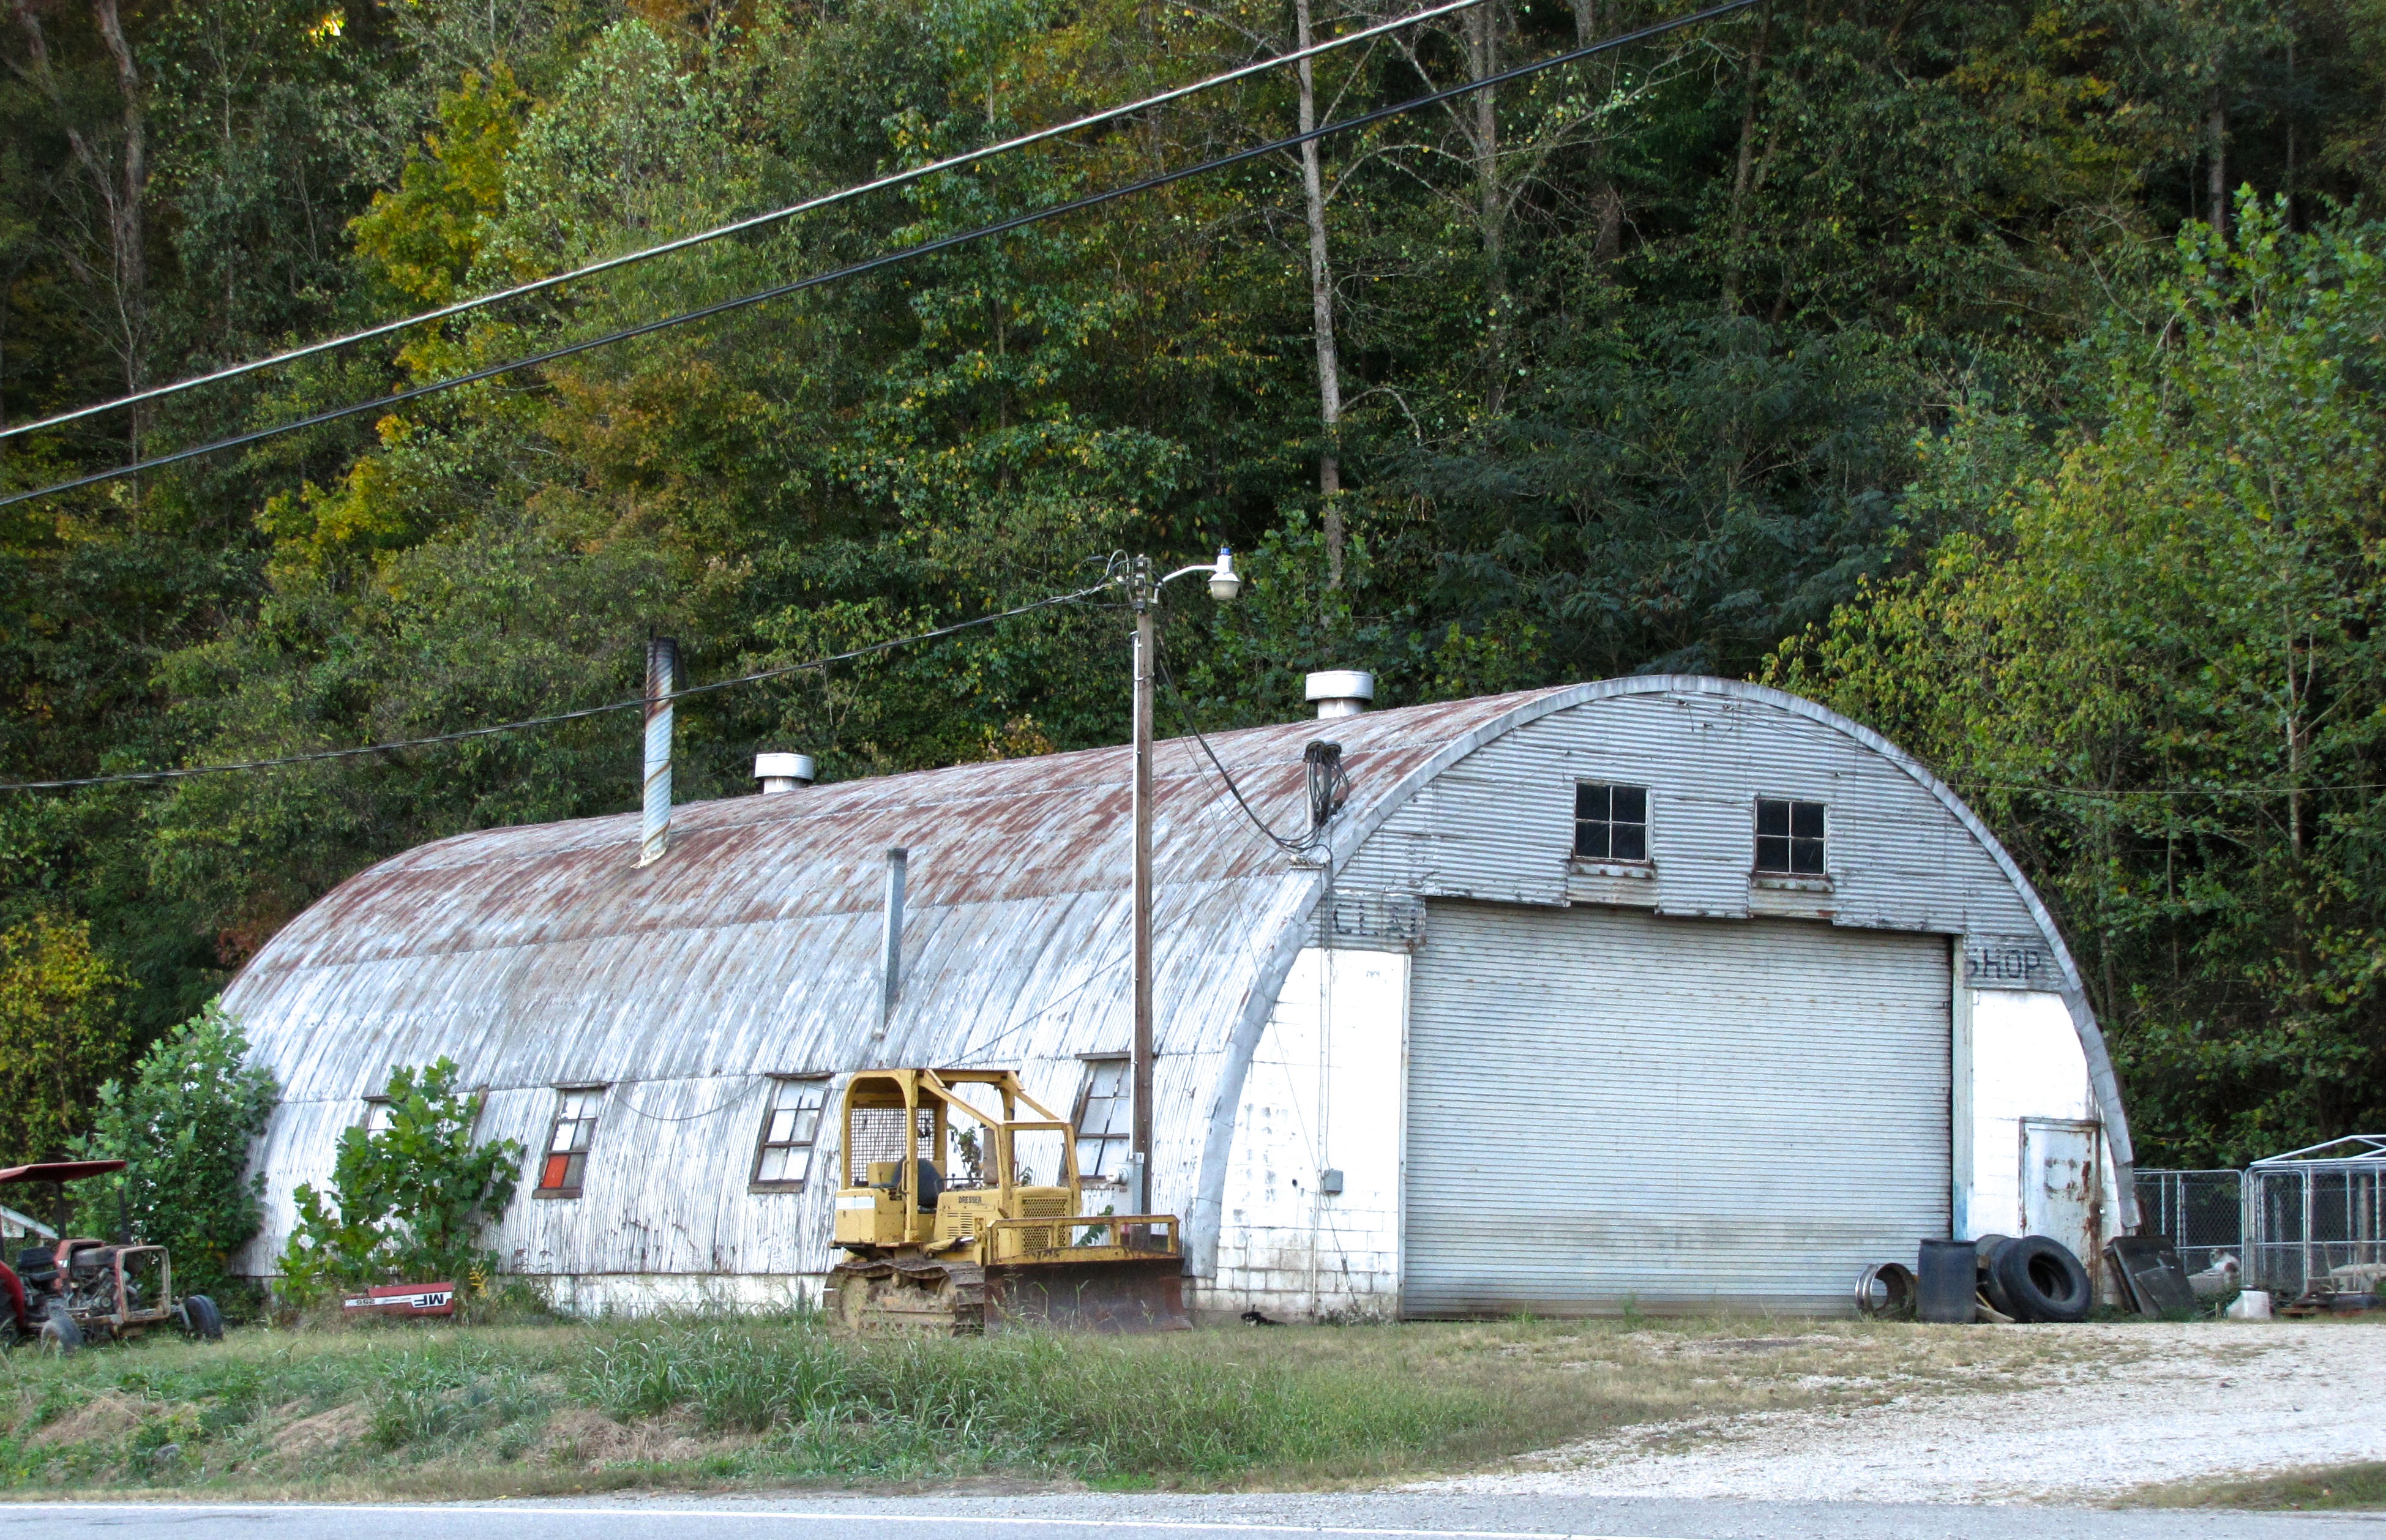 quonset hut in Beckley, WV